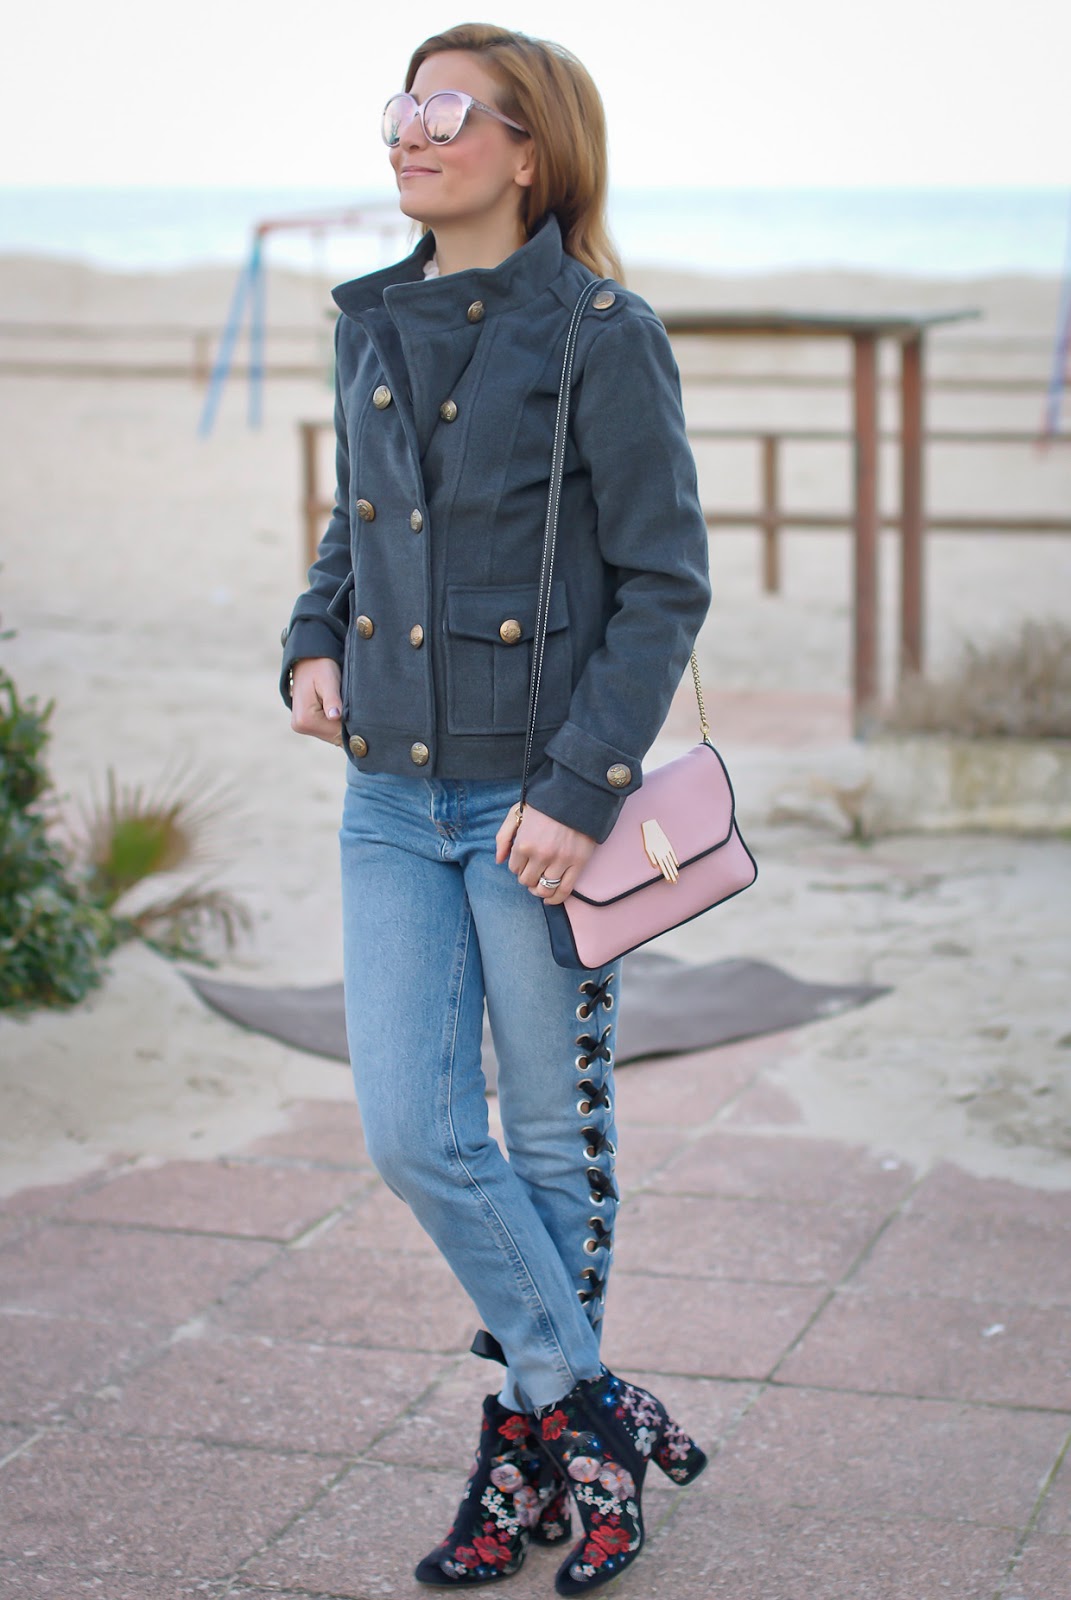 Eyelet jeans and Dresslink grey military jacket on Fashion and Cookies fashion blog, fashion blogger style